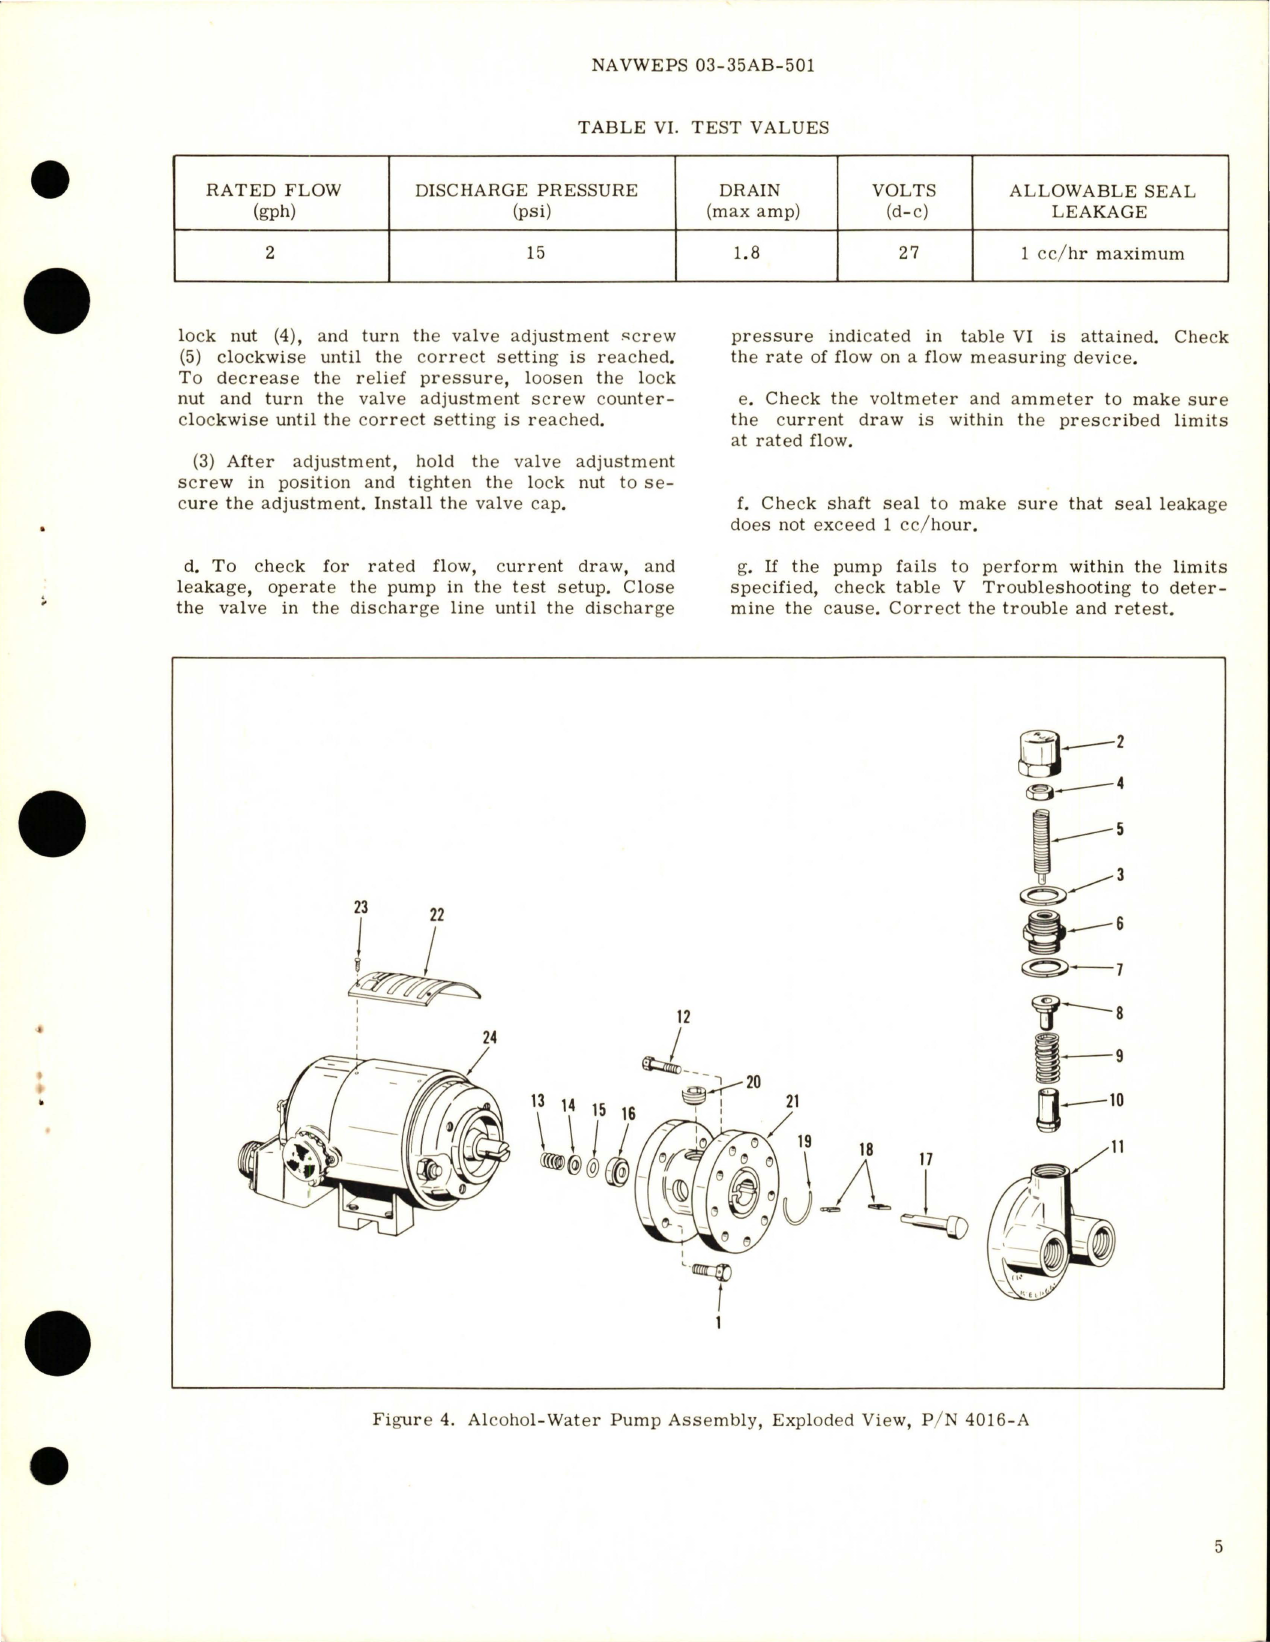 Sample page 5 from AirCorps Library document: Overhaul Instructions with Parts Breakdown for Alcohol-Water Pump Assembly - Part 4016-A